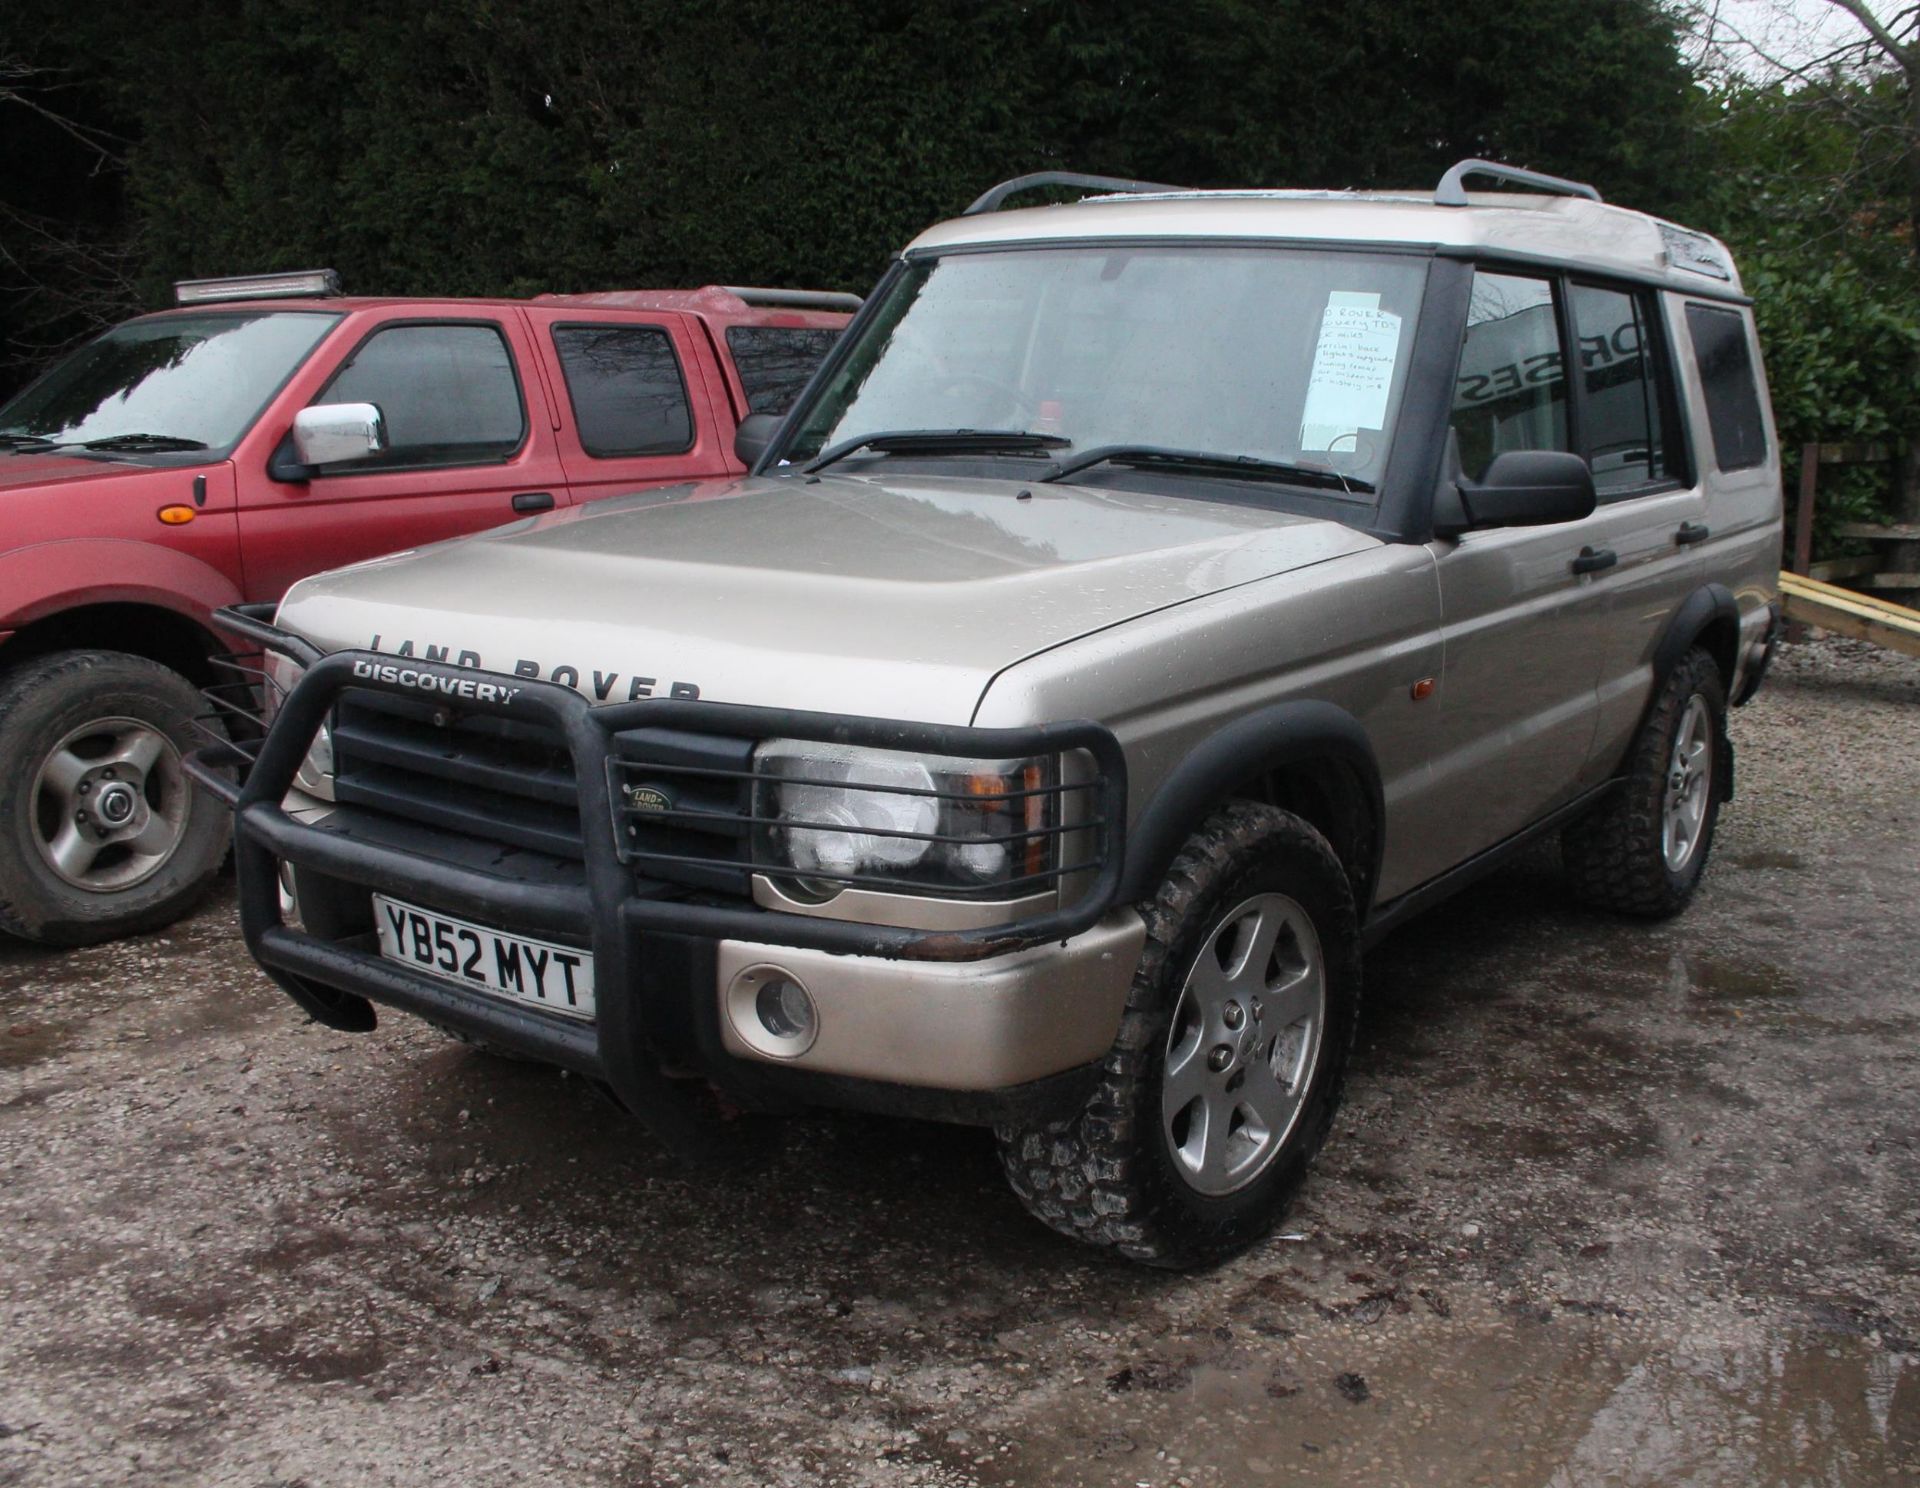 LAND ROVER DISCOVERY 2 YB52MYT MANUAL DIESEL APPROX 158000 MILES FIRST REG 2002 PART SERVICE HISTORY - Image 2 of 4